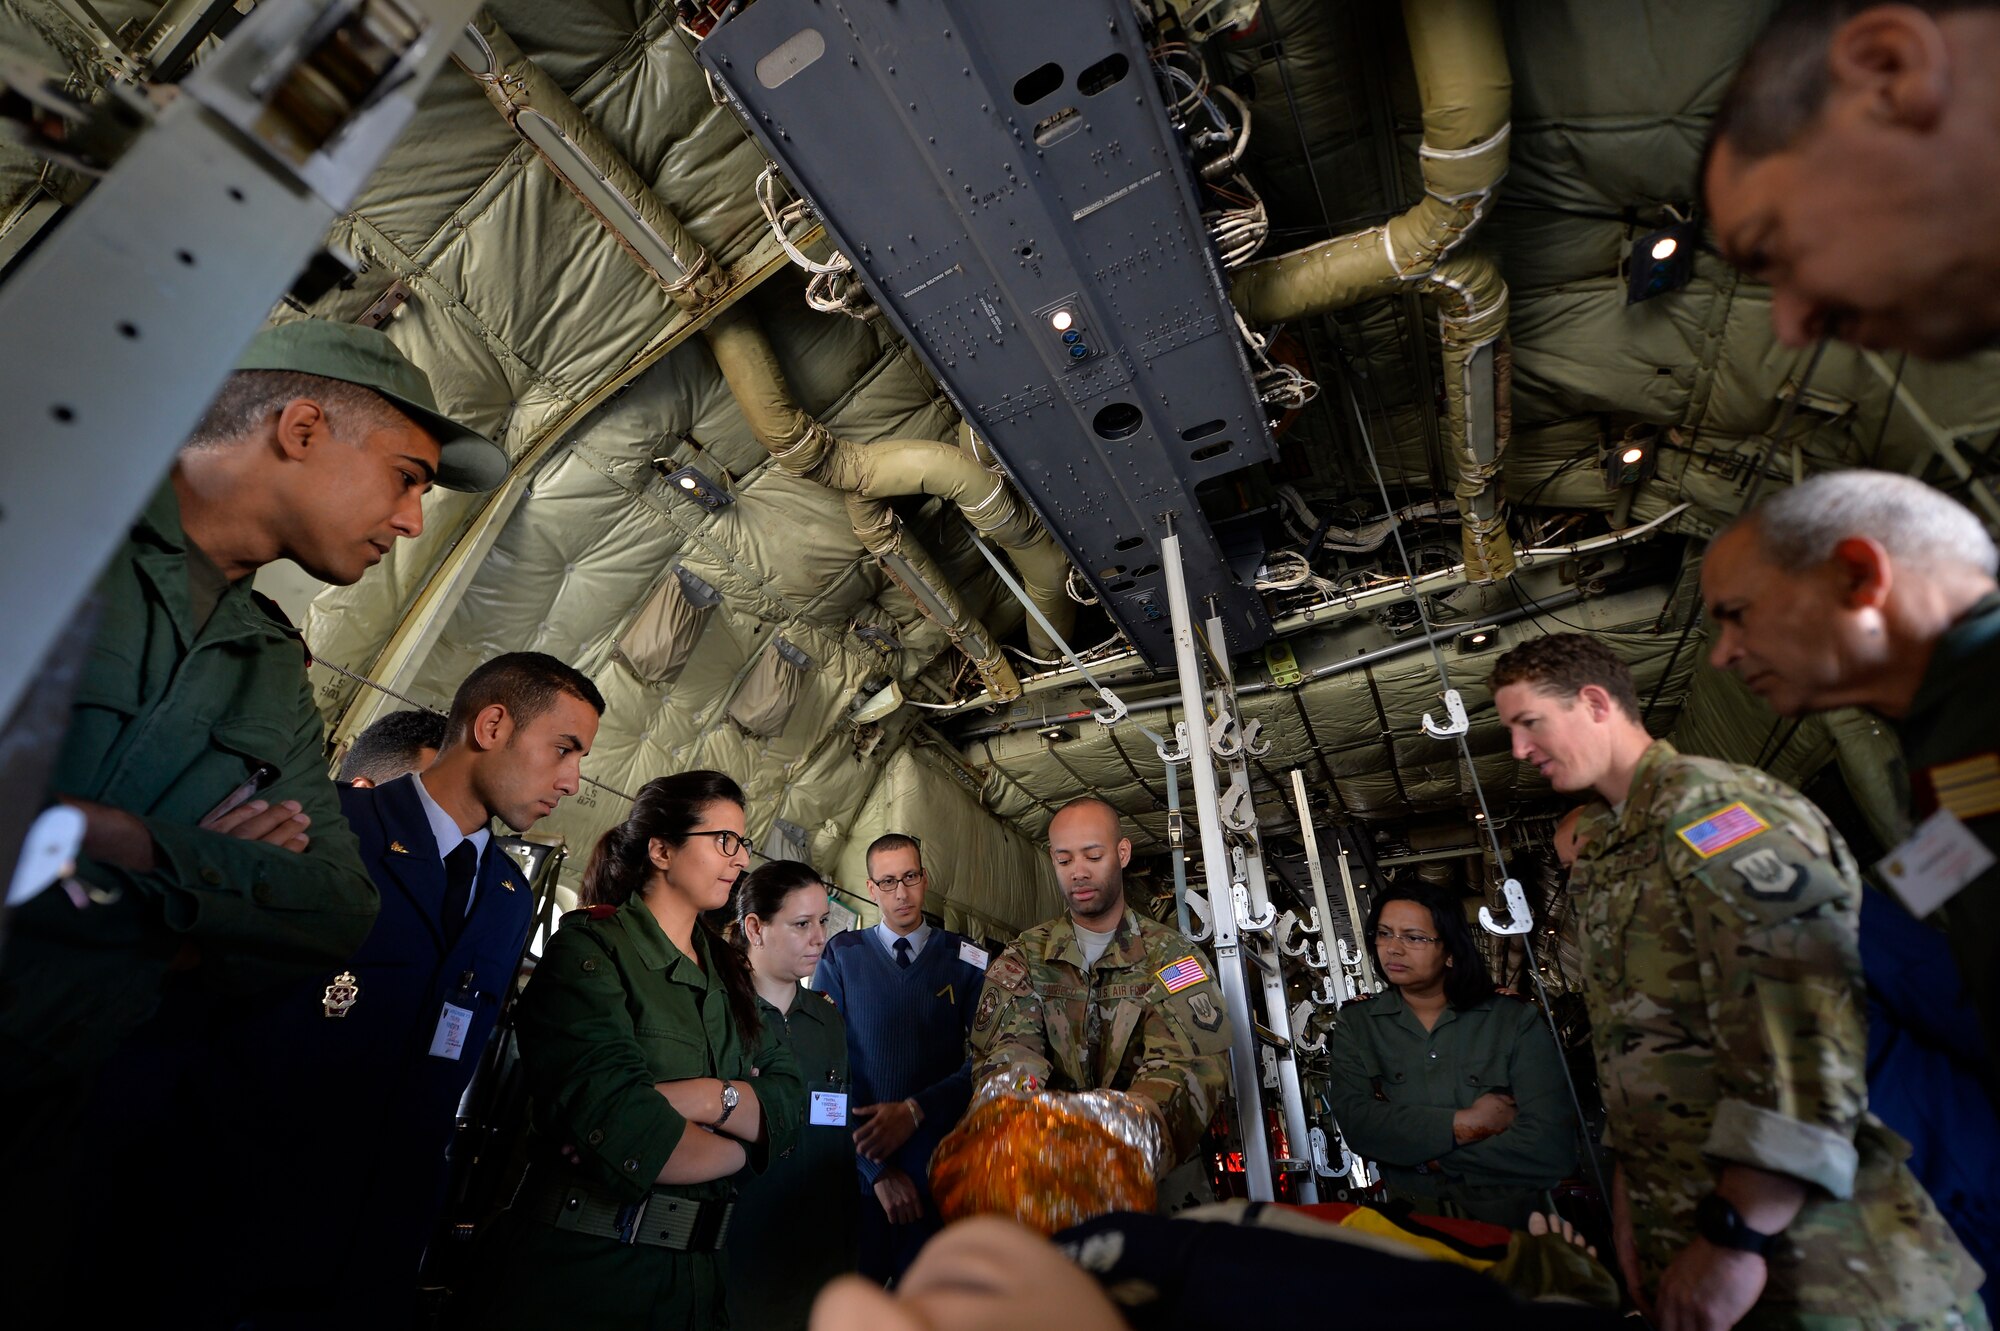 U.S. Air Force Senior Airman Kyle Pacheco, 86th Aeromedical Evacuation Squadron AE technician, center, demonstrates use of an emergency passenger oxygen system during Exercise African Lion 2018, April 19, 2018, at Kenitra Air Base, Morocco. Service members from the Moroccan Royal Armed Forces observed and practiced AE procedures to further develop one another’s capabilities, allowing both nations to operate more efficiently in the event of a contingency operation. (U.S. Air Force photo by Staff Sgt. Nesha Humes Stanton)